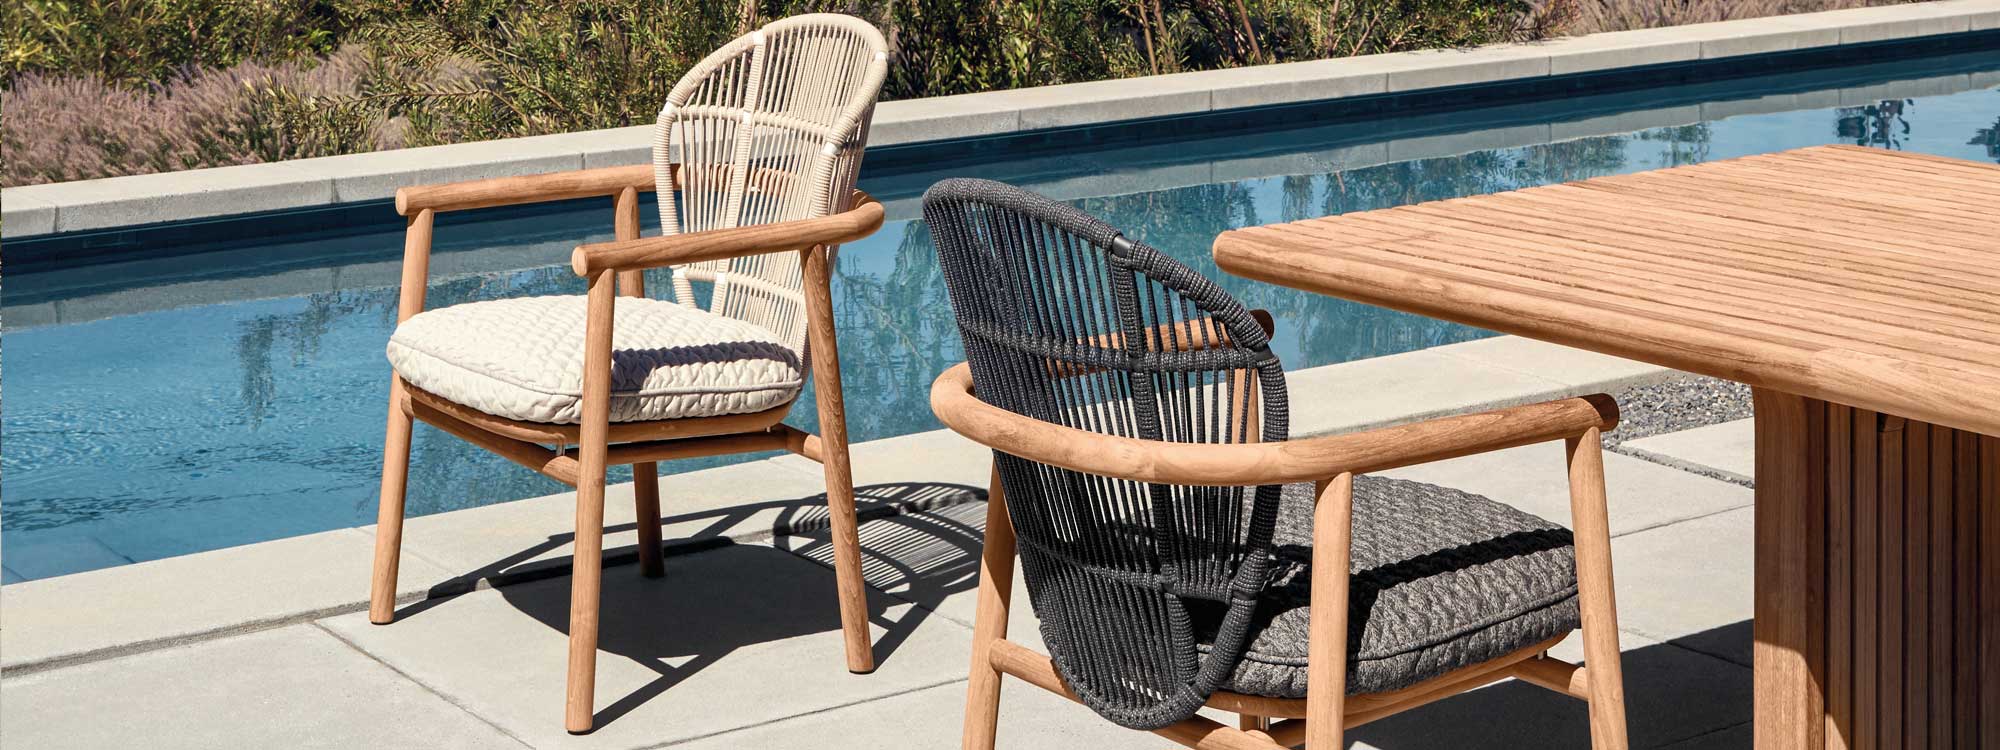 Image of pair of Gloster Fern teak garden chairs and Deck modern teak table on sunny poolside terrace